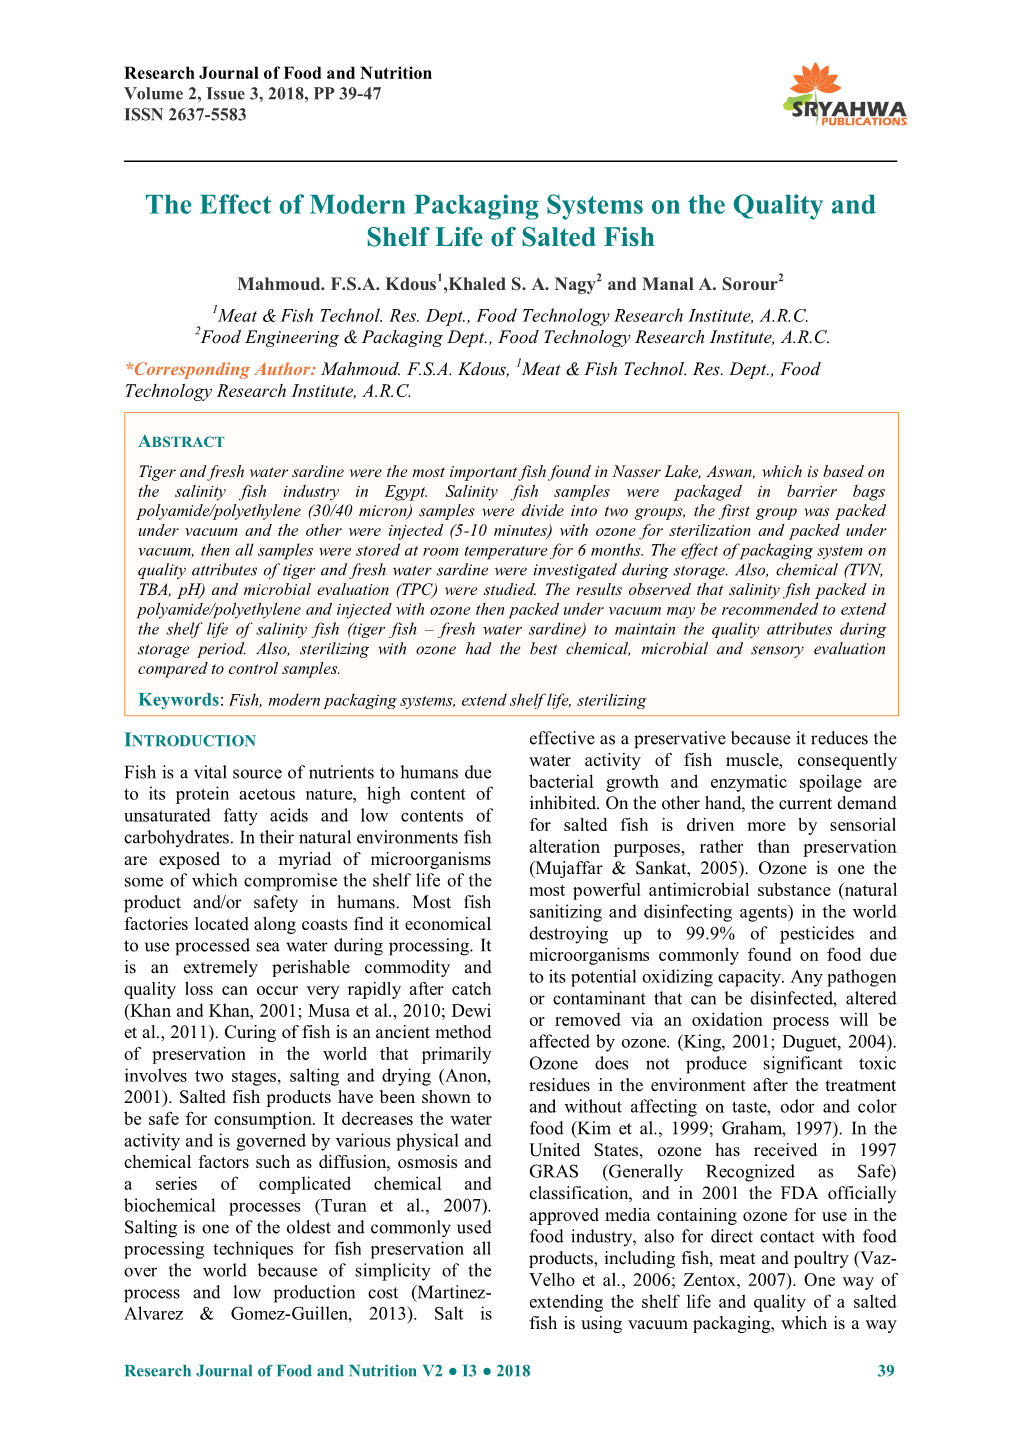 The Effect of Modern Packaging Systems on the Quality and Shelf Life of Salted Fish